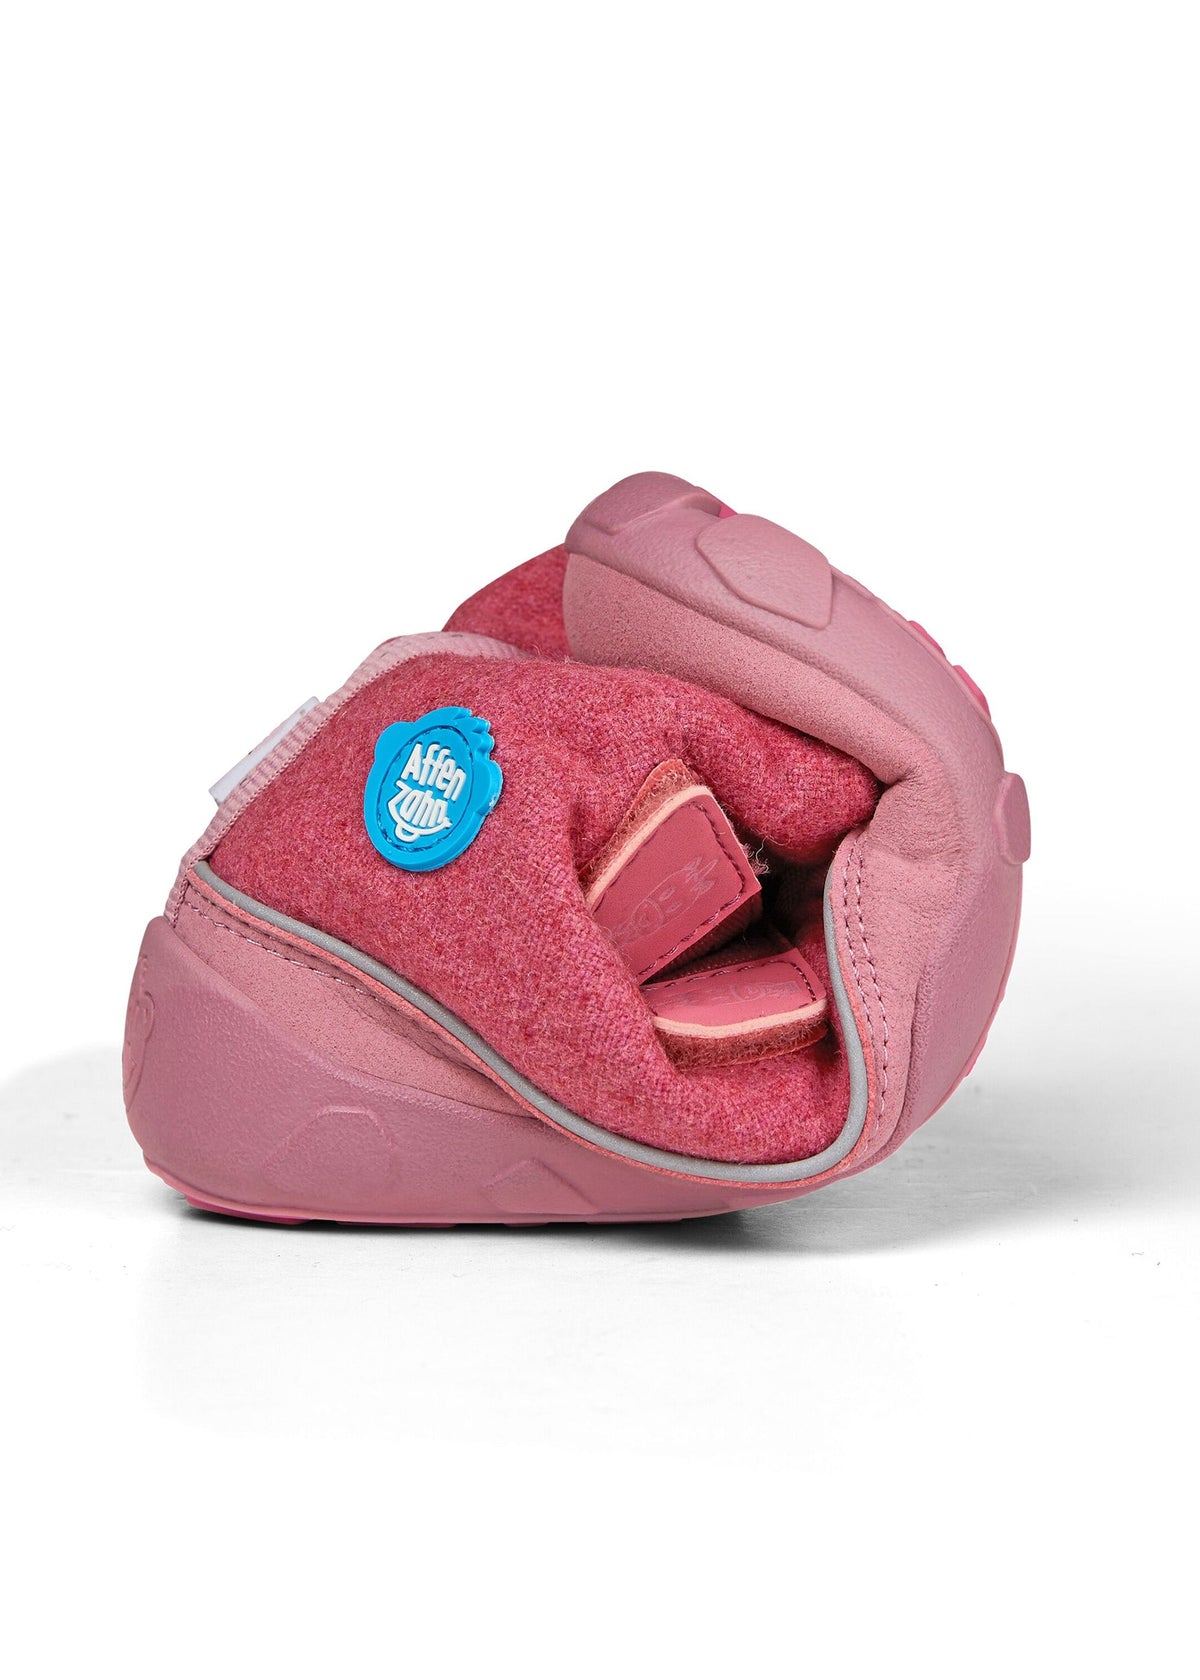 Children's barefoot shoes - Wool Comfy Unicorn, winter shoes with TEX membrane - pink, wool